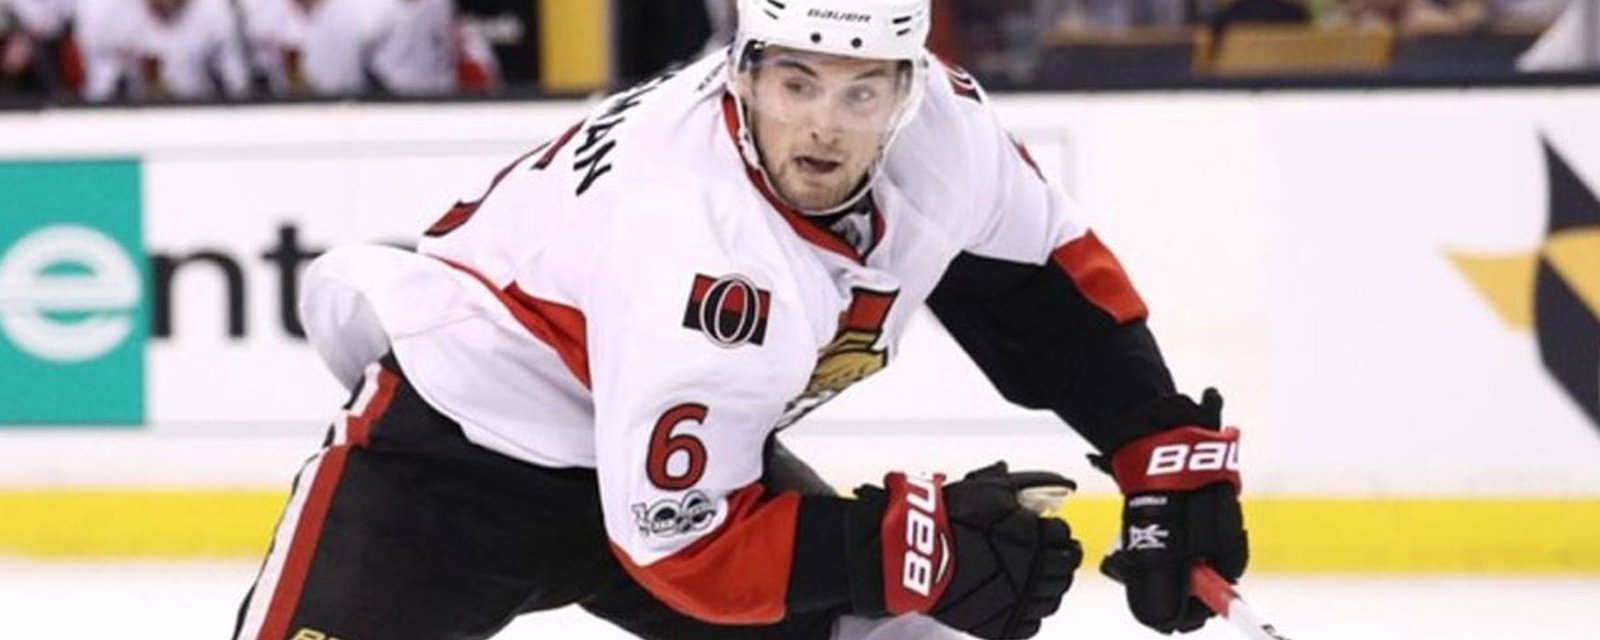 Sens' Wideman updates fans on his surgery with a little too much detail!